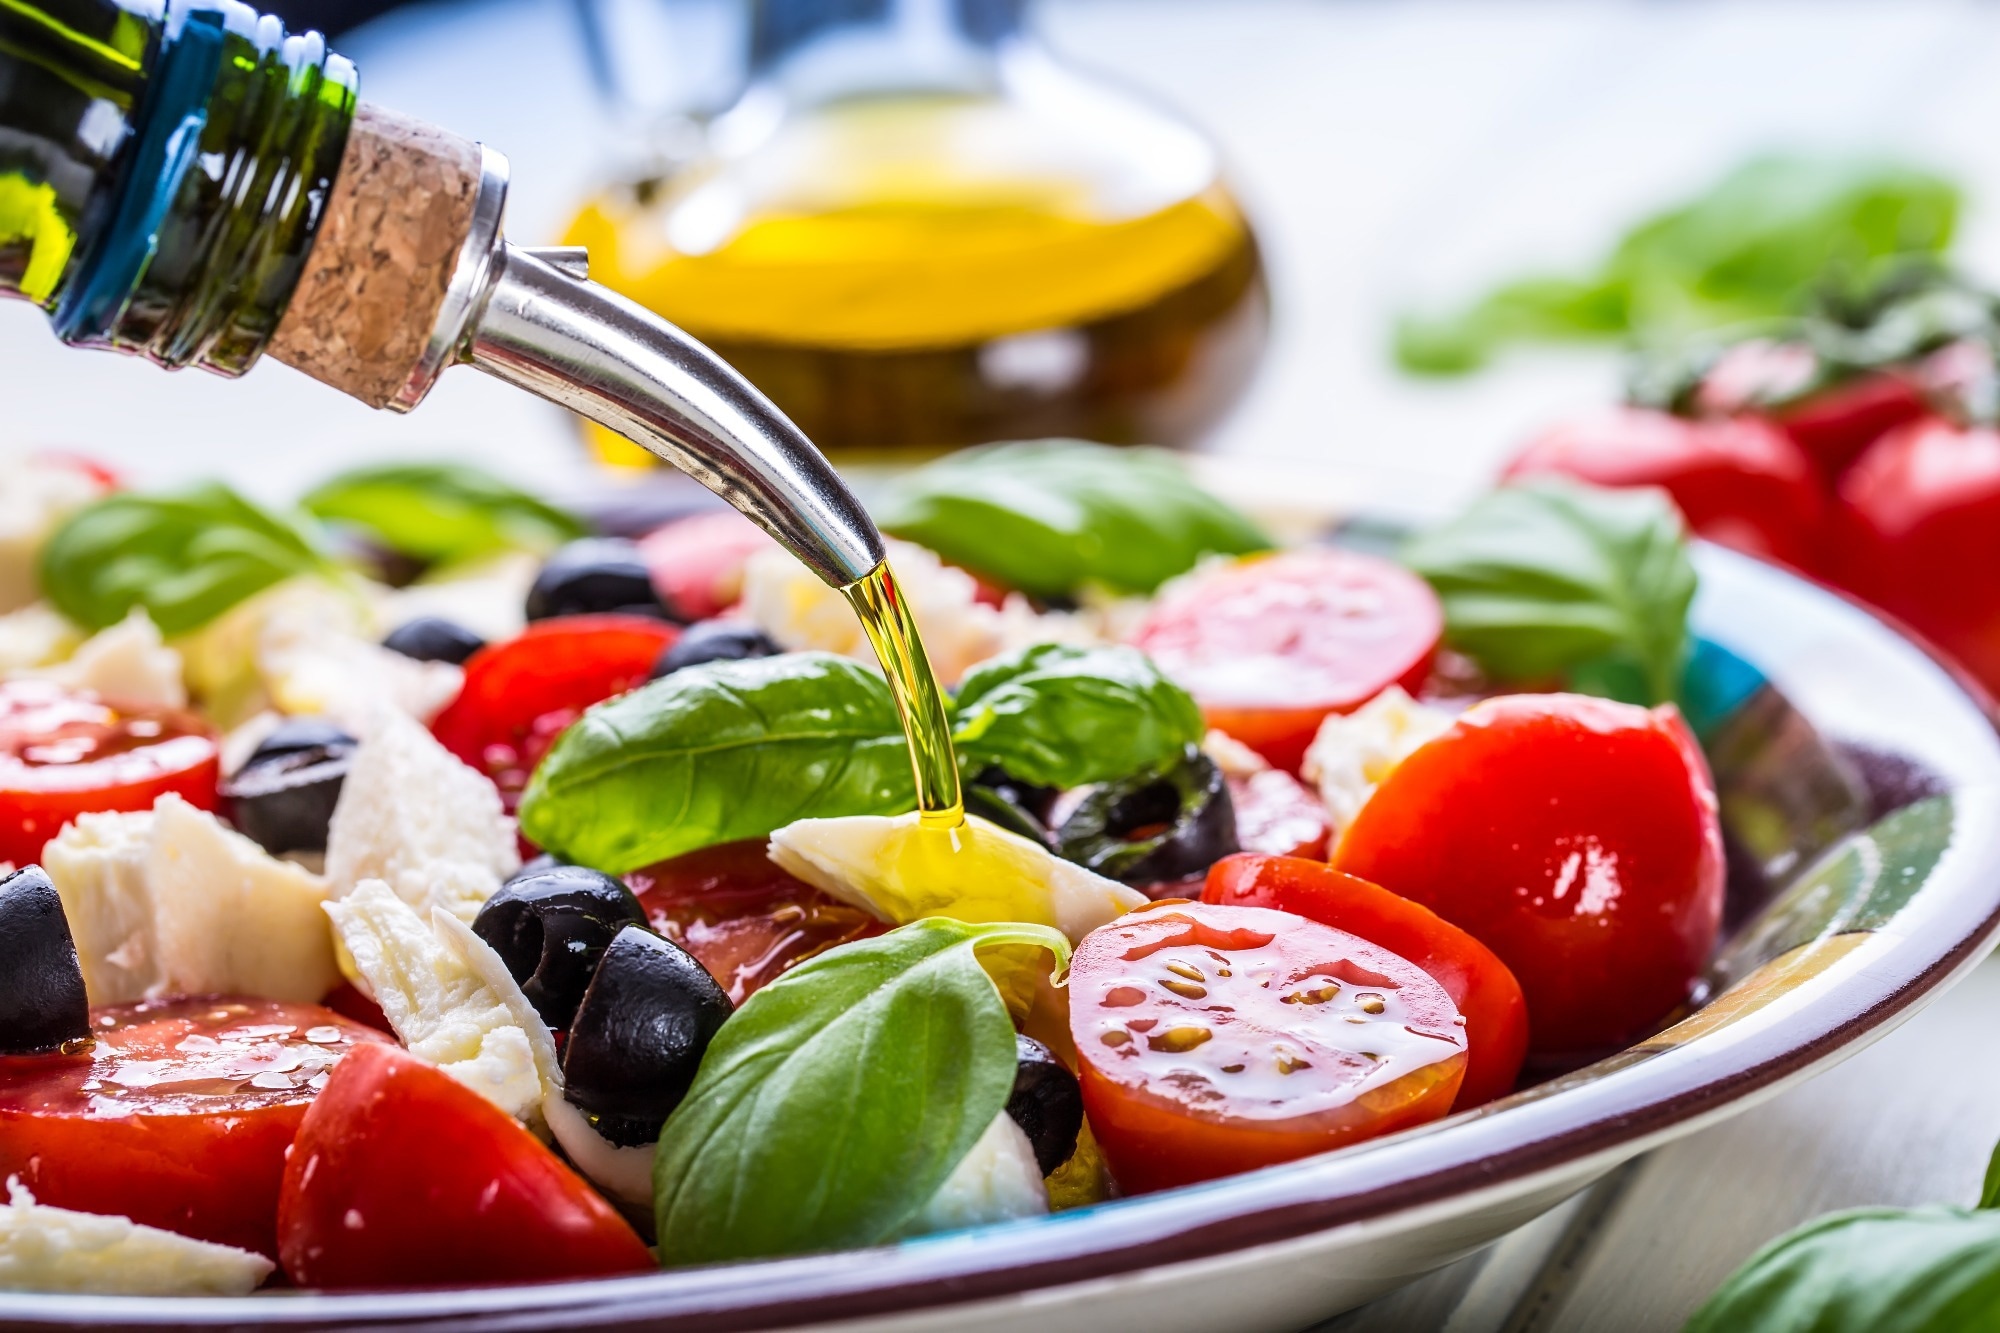 An assessment of adherence to the Mediterranean Diet among a Spanish University campus community